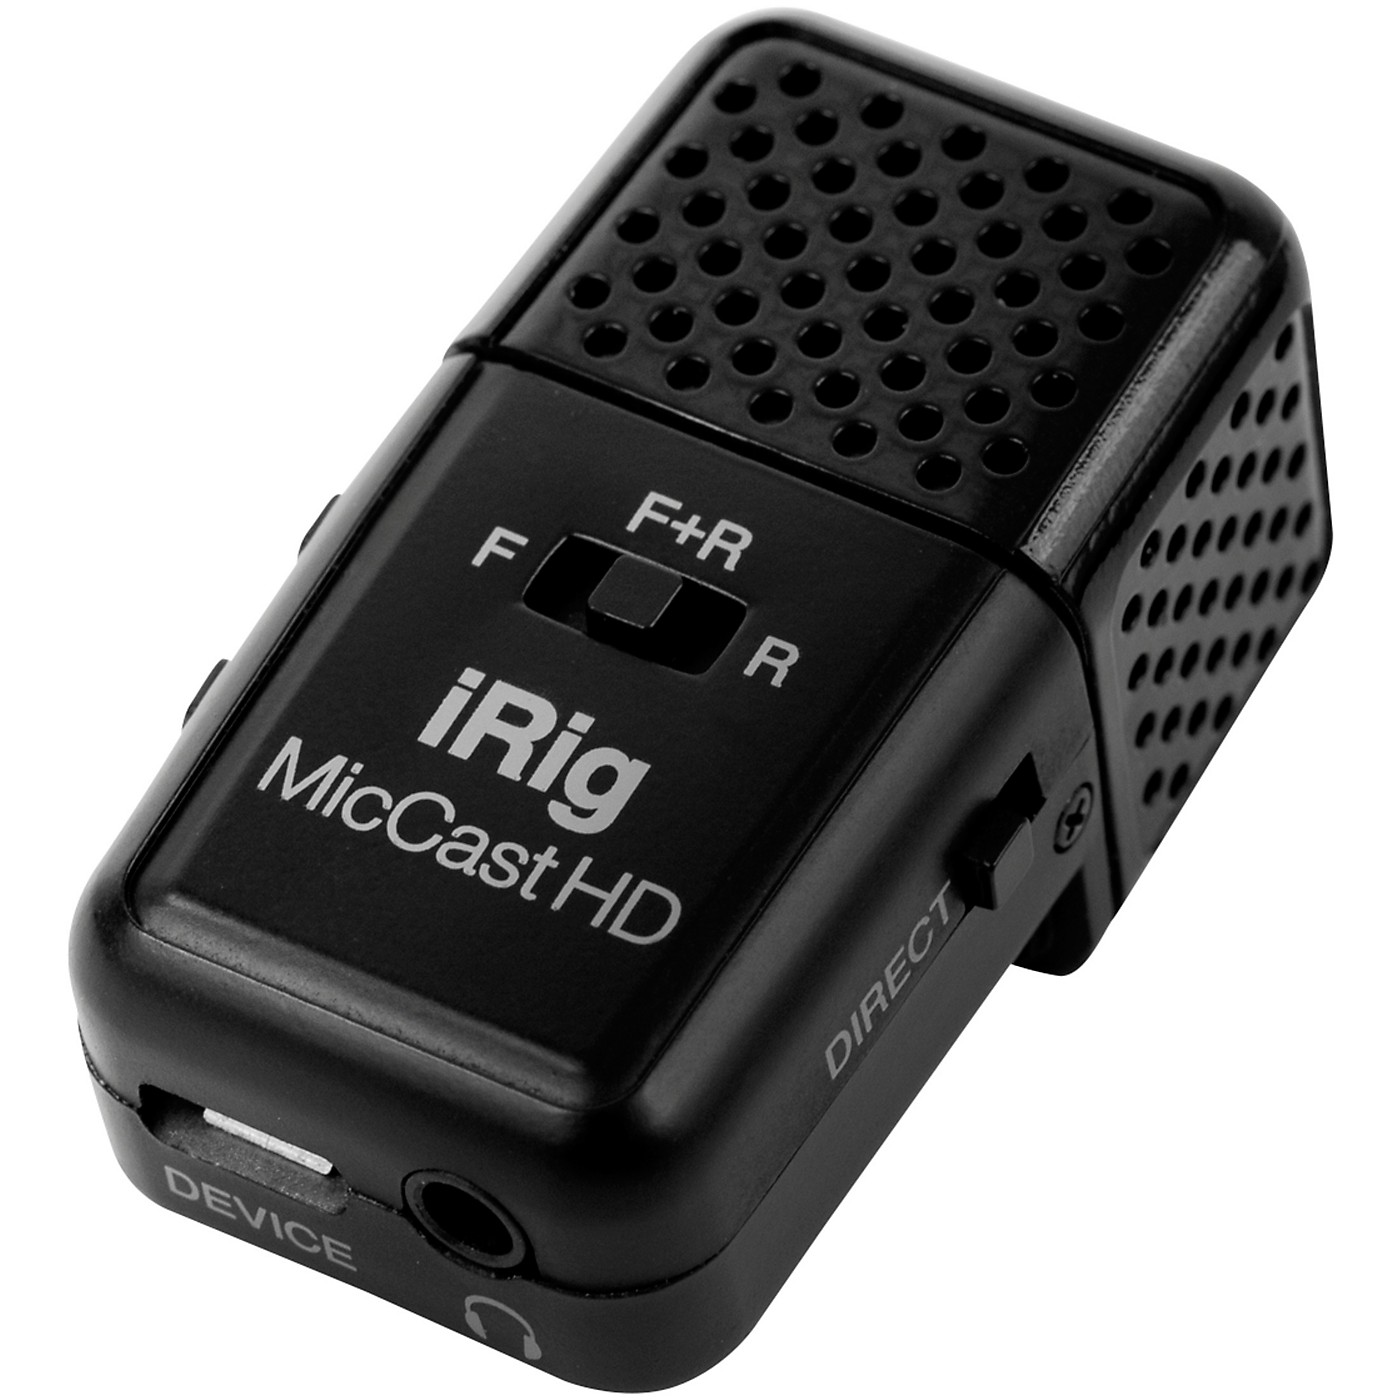 IK Multimedia iRig Mic Cast HD for Mac and Select Android Devices thumbnail